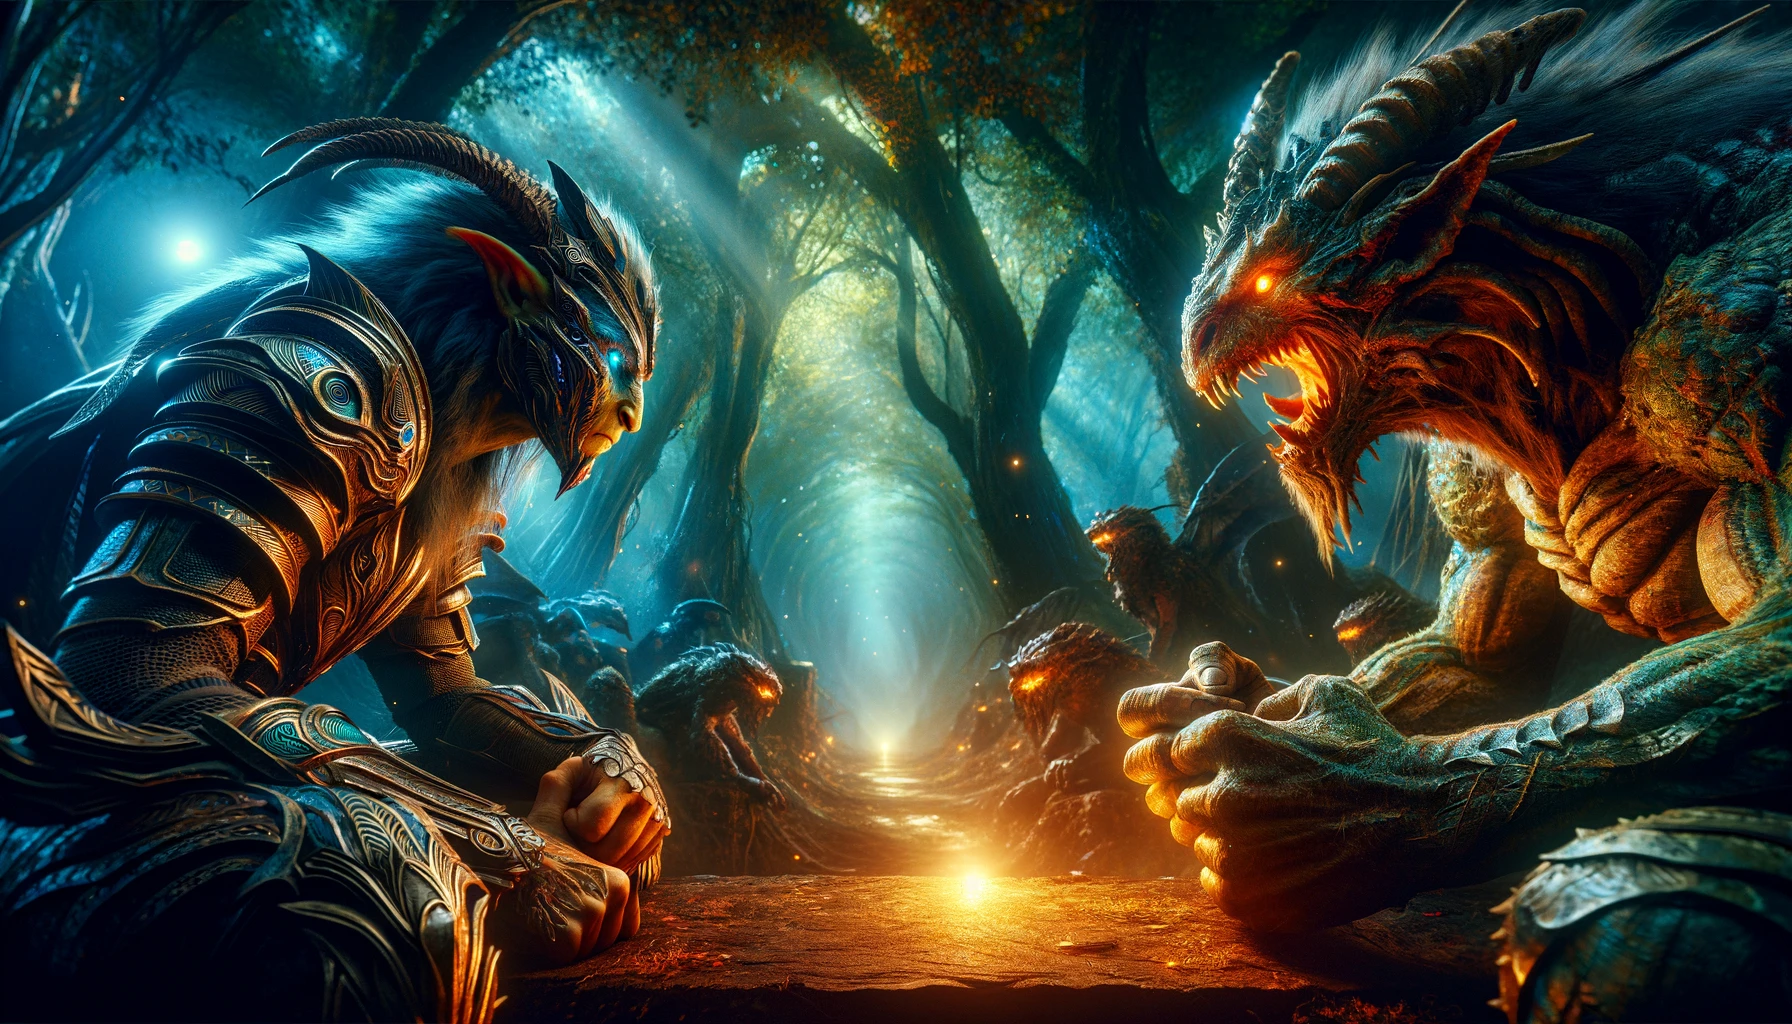 A vibrant wide image depicting two fantastical creatures in a tense standoff in a mystical forest, one humanoid in intricate armor and the other beast-like with scales and large horns.